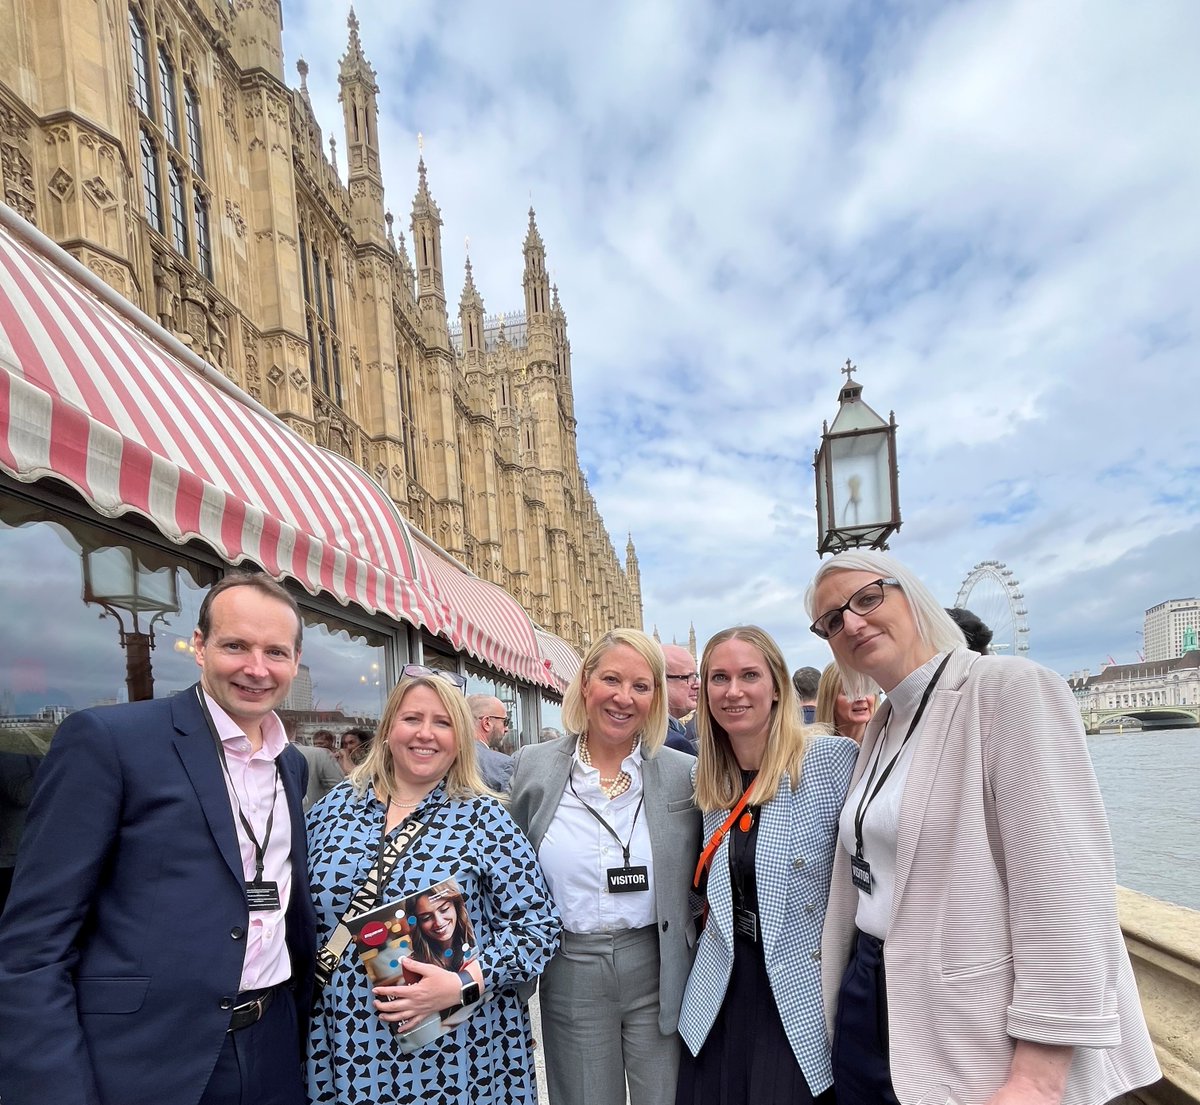 PRA Group was honored to join our valued industry partners @StepChange Debt Charity and TDX Group for the UK House of Lords' launch of the Equifax Financial Health Report, which provides the government with insights on how they can contribute to the future of the economy.